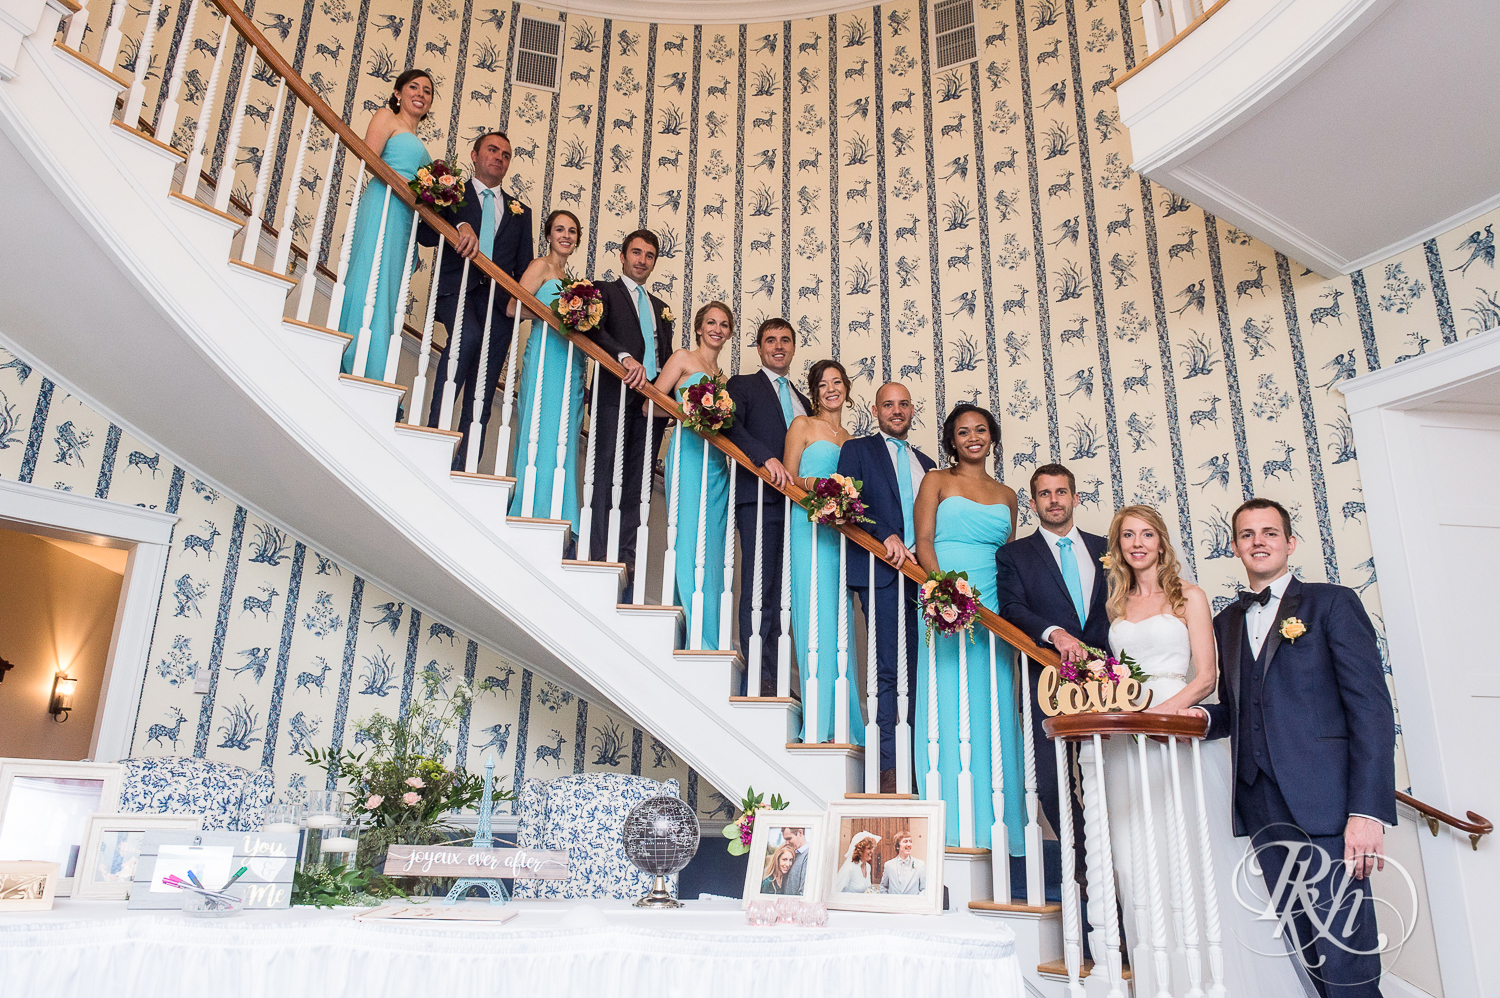 Bride and groom smile with wedding party on staircase on wedding day at White Bear Yacht Club in Dellwood, Minnesota.